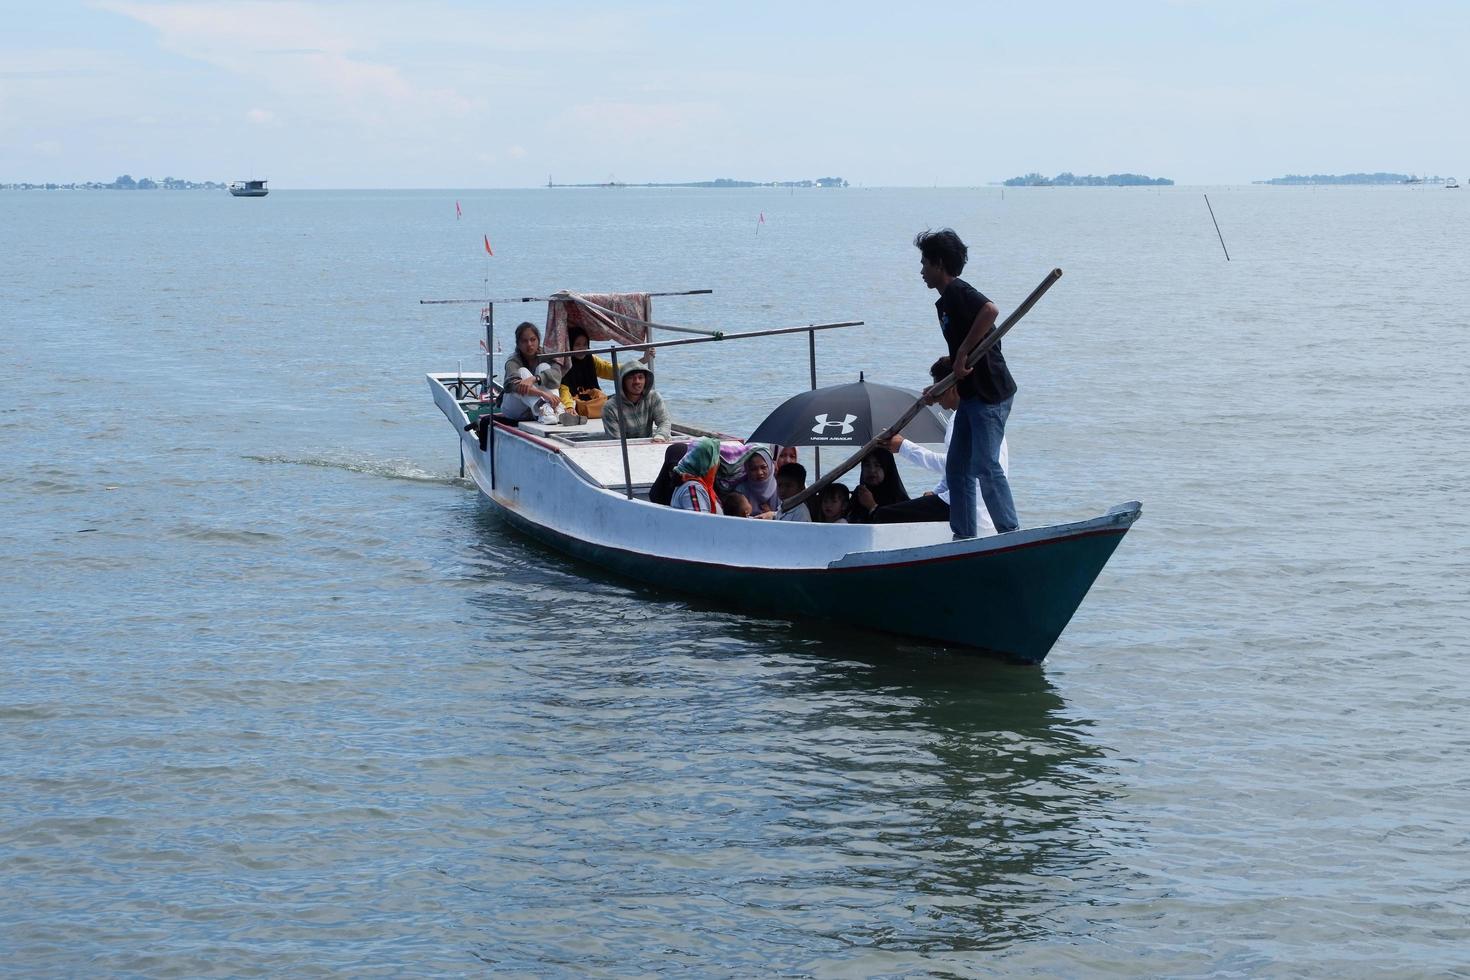 South Sulawesi, Indonesia - April 25, 2022, Boat contains many people cross on the sea photo